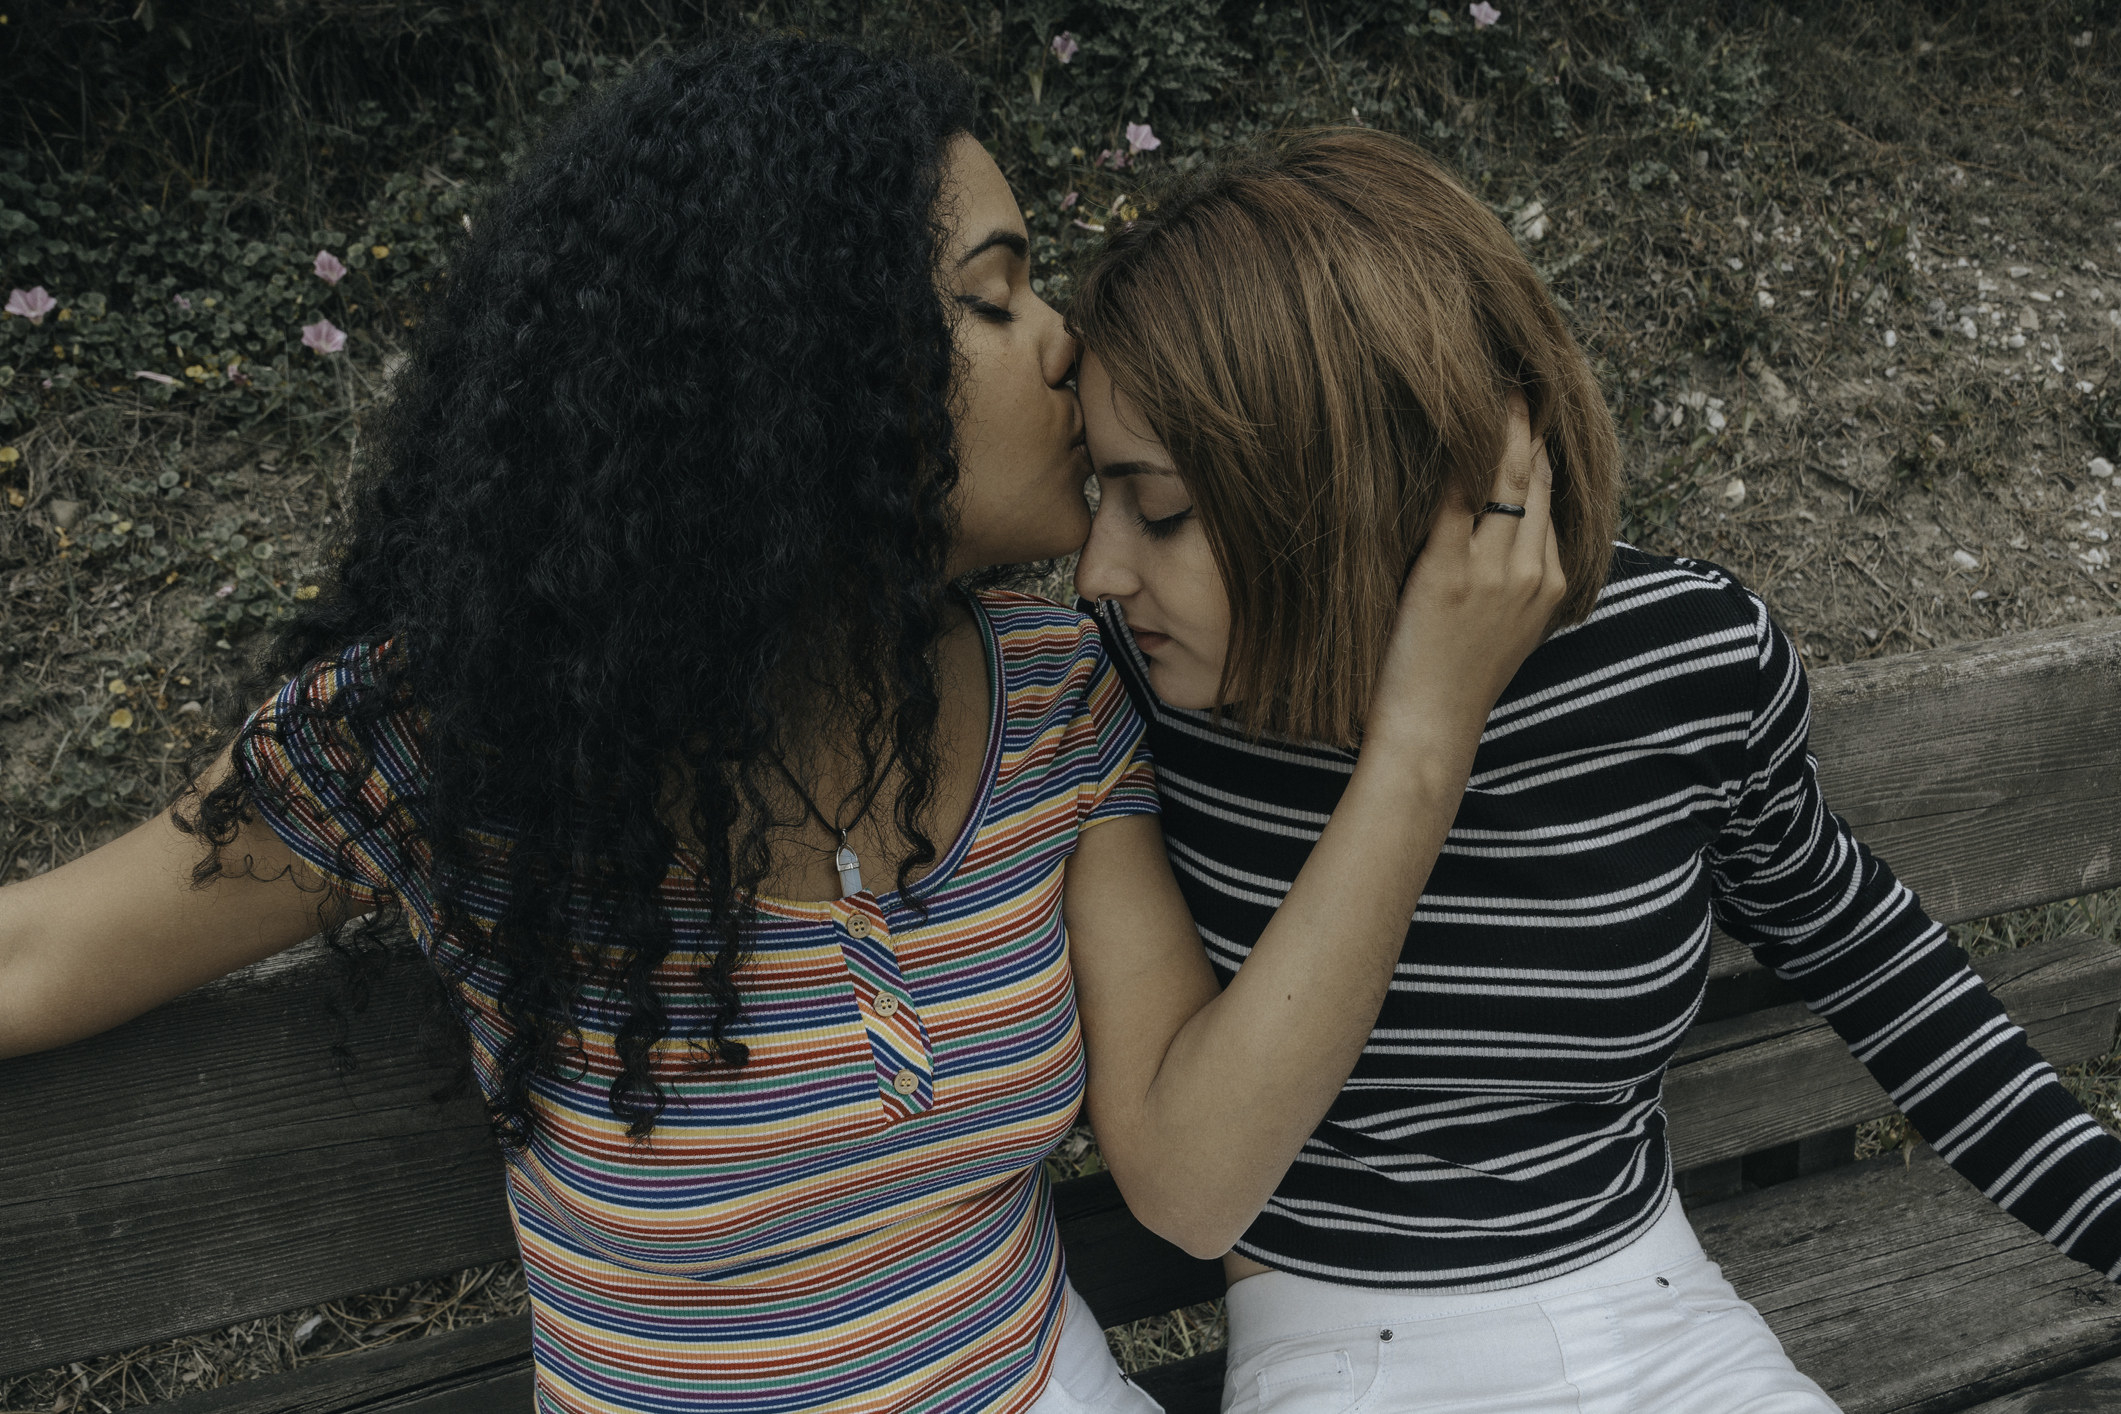 Two teen lesbians kissing on a bench